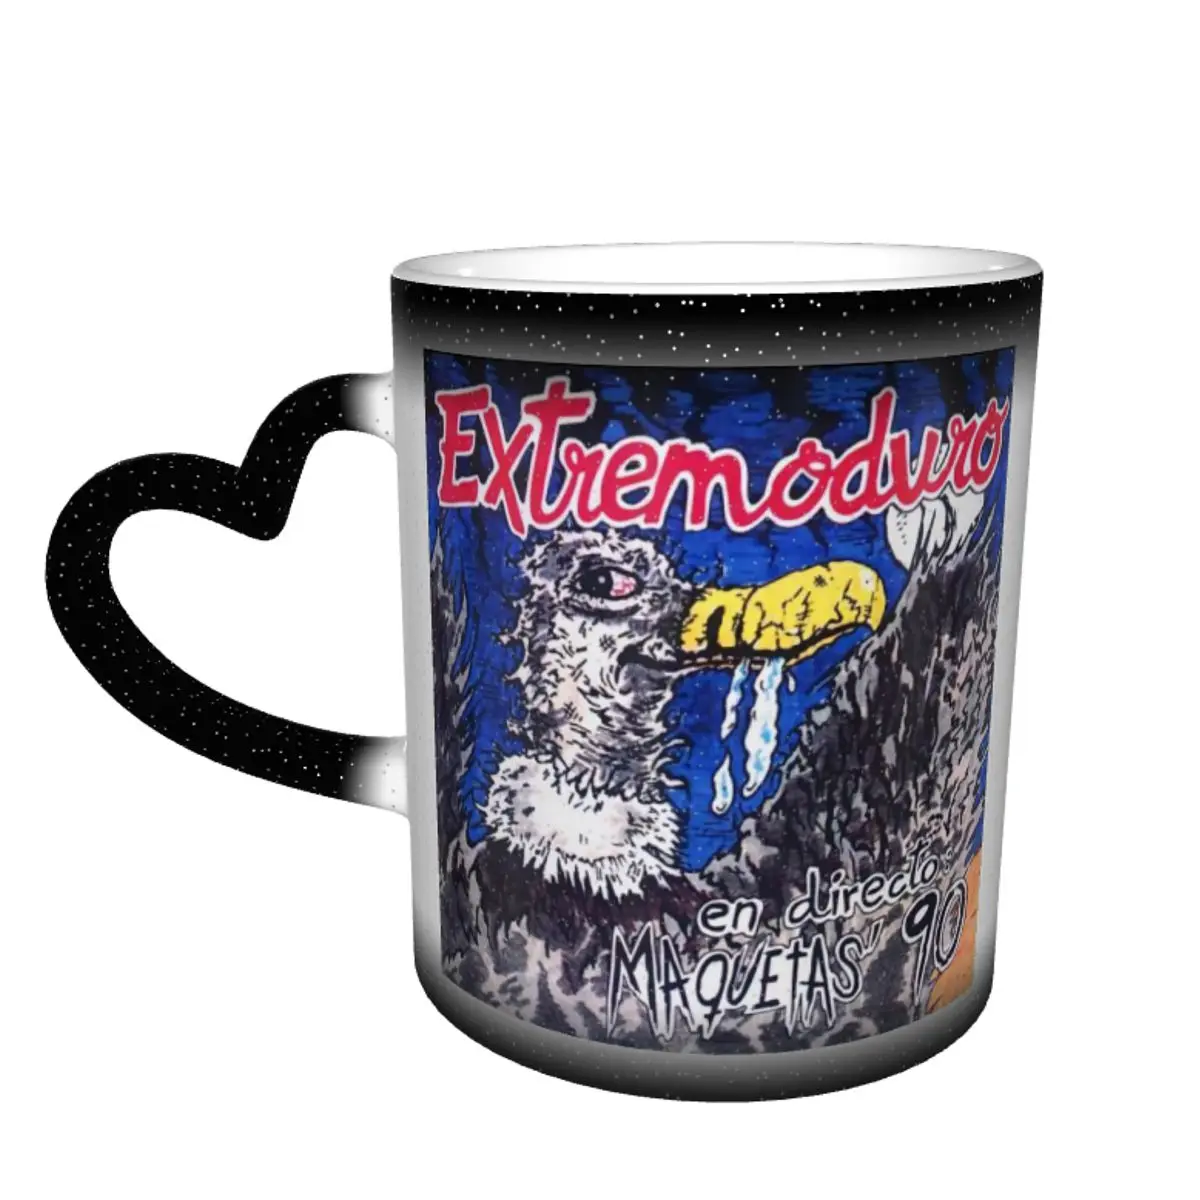 

Extremoduro Color Changing Mug in the Sky Novelty Ceramic Heat-sensitive Cup Funny Novelty Extremoduro Beer mugs